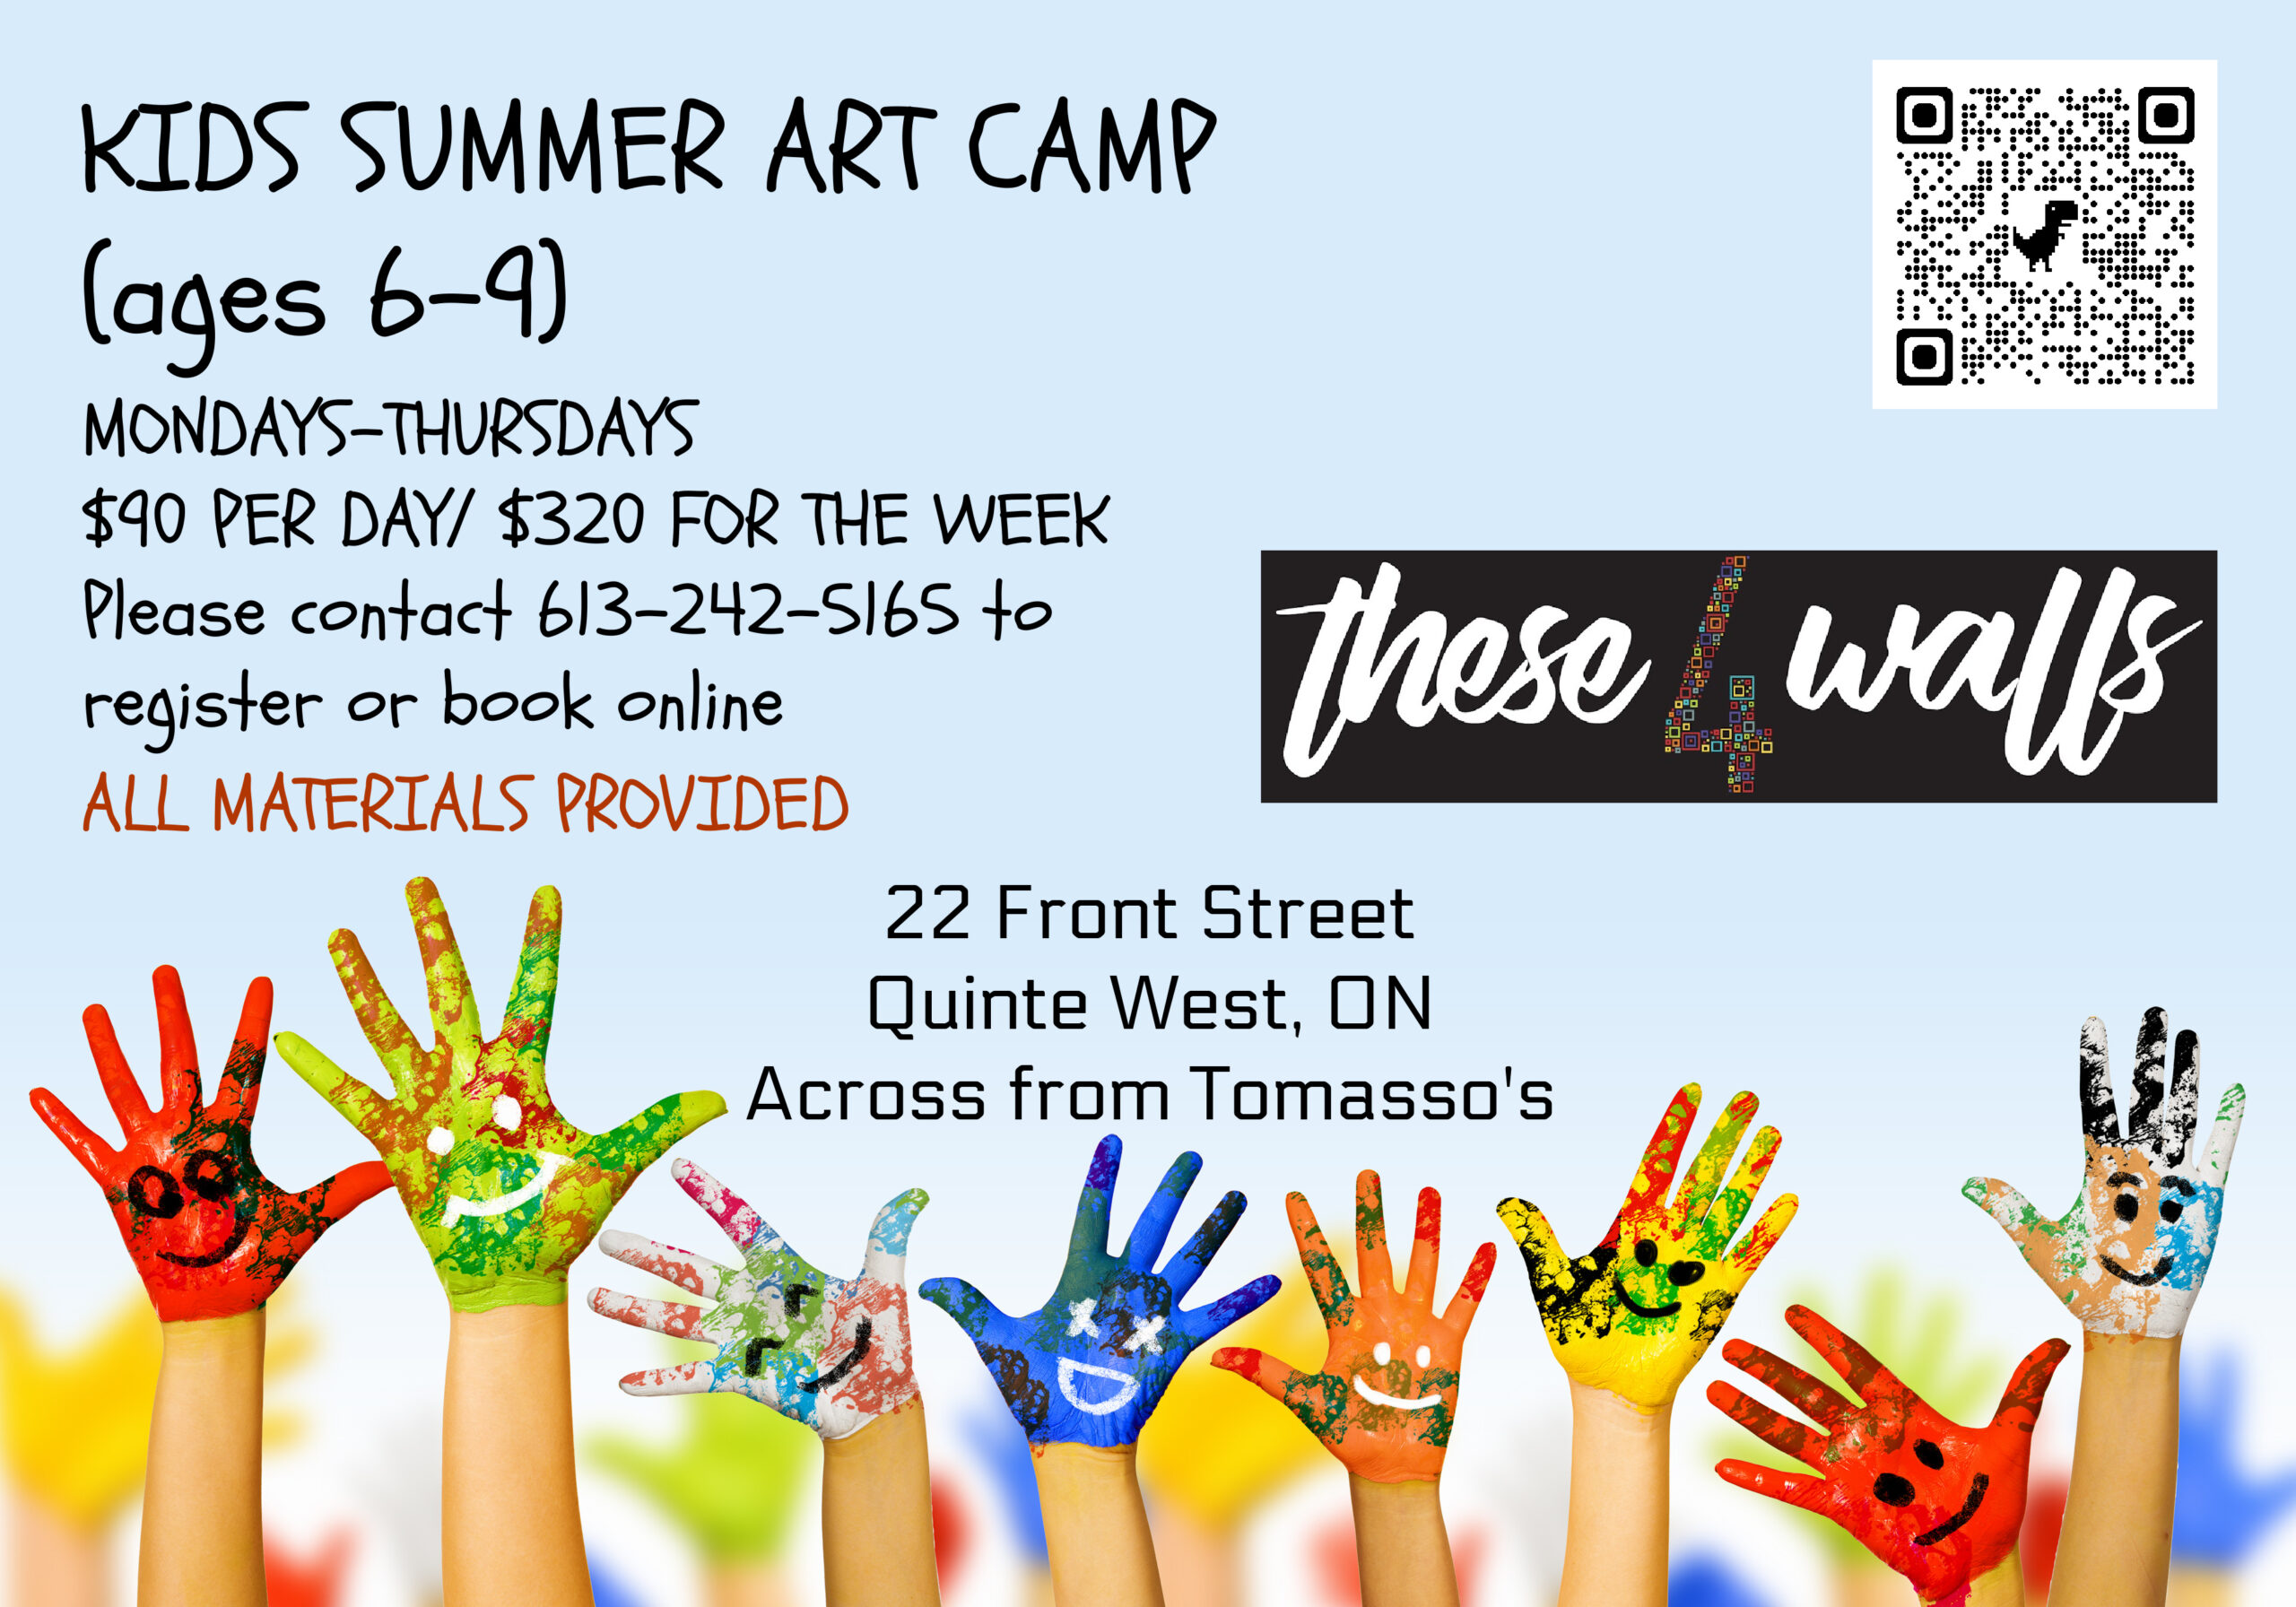 Poster with photo of kids hands painted and event details.